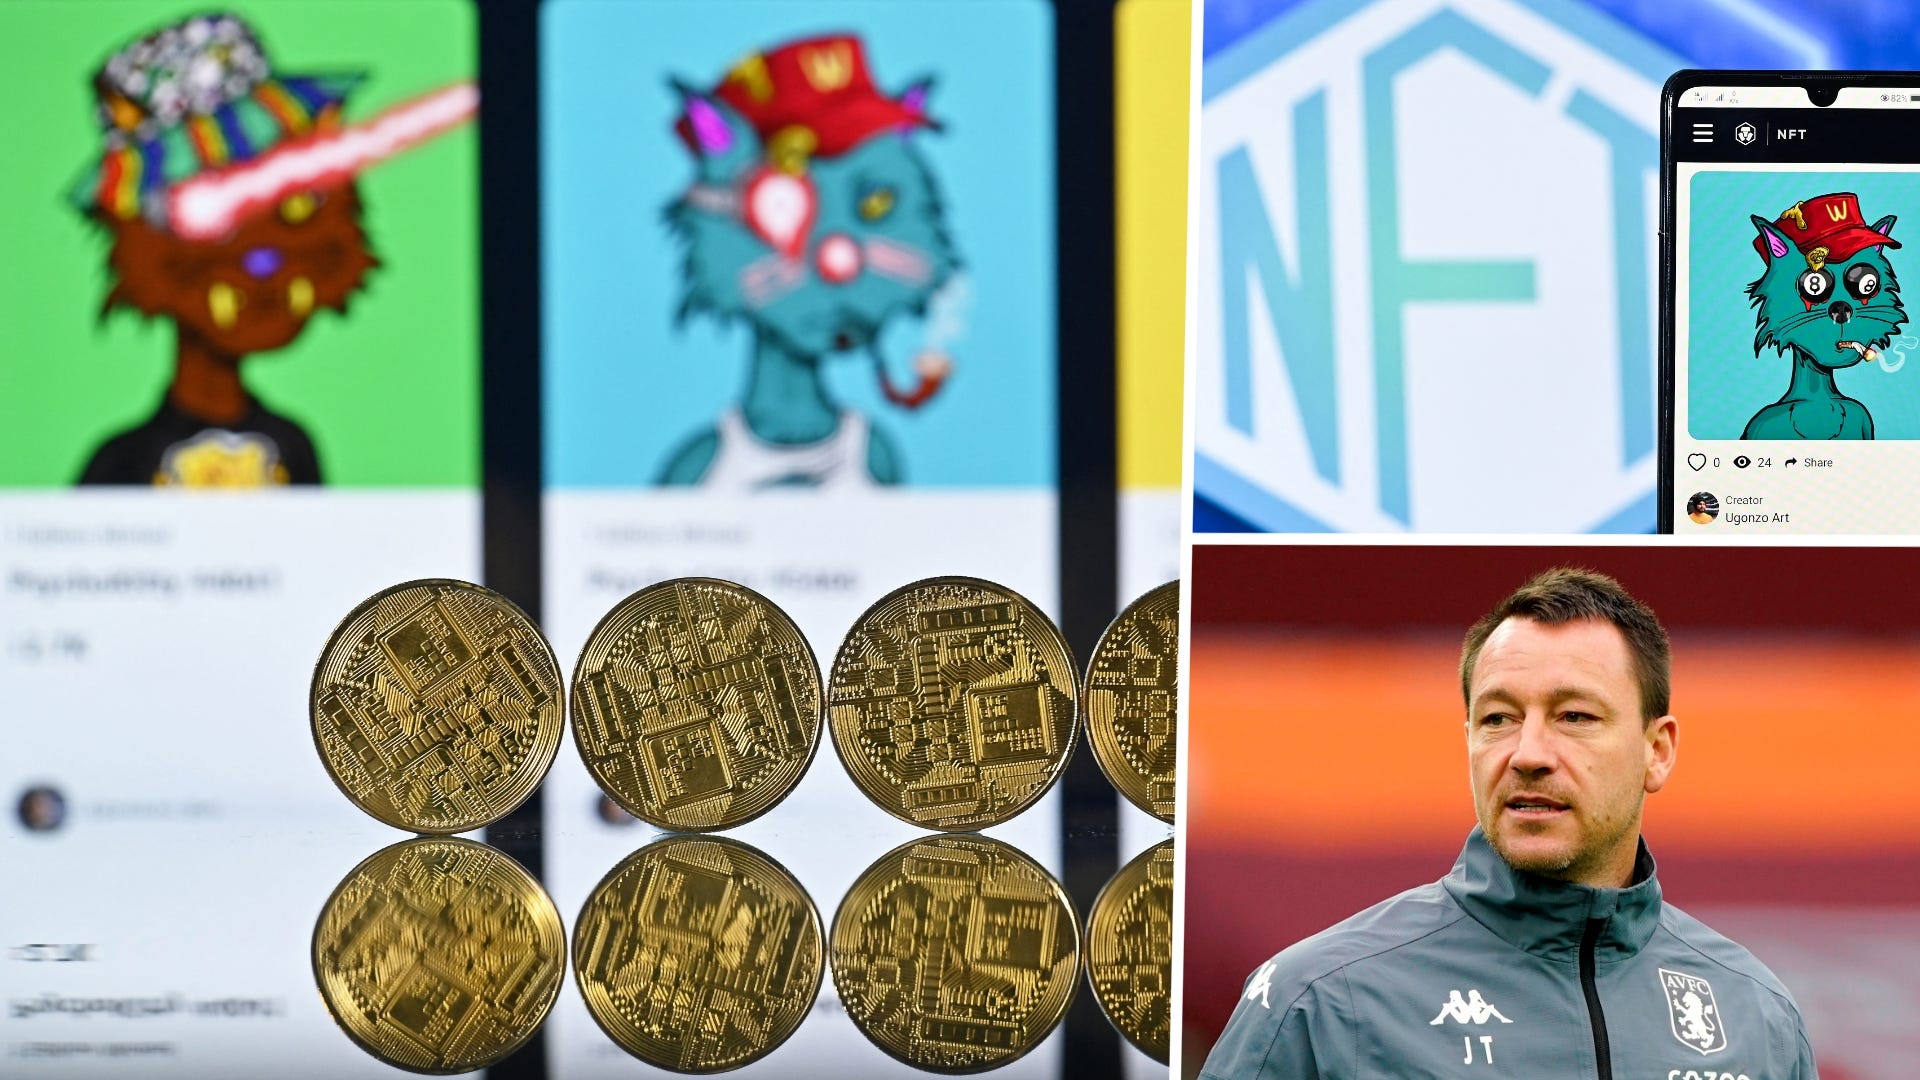 NFT cryptocurrency explainer